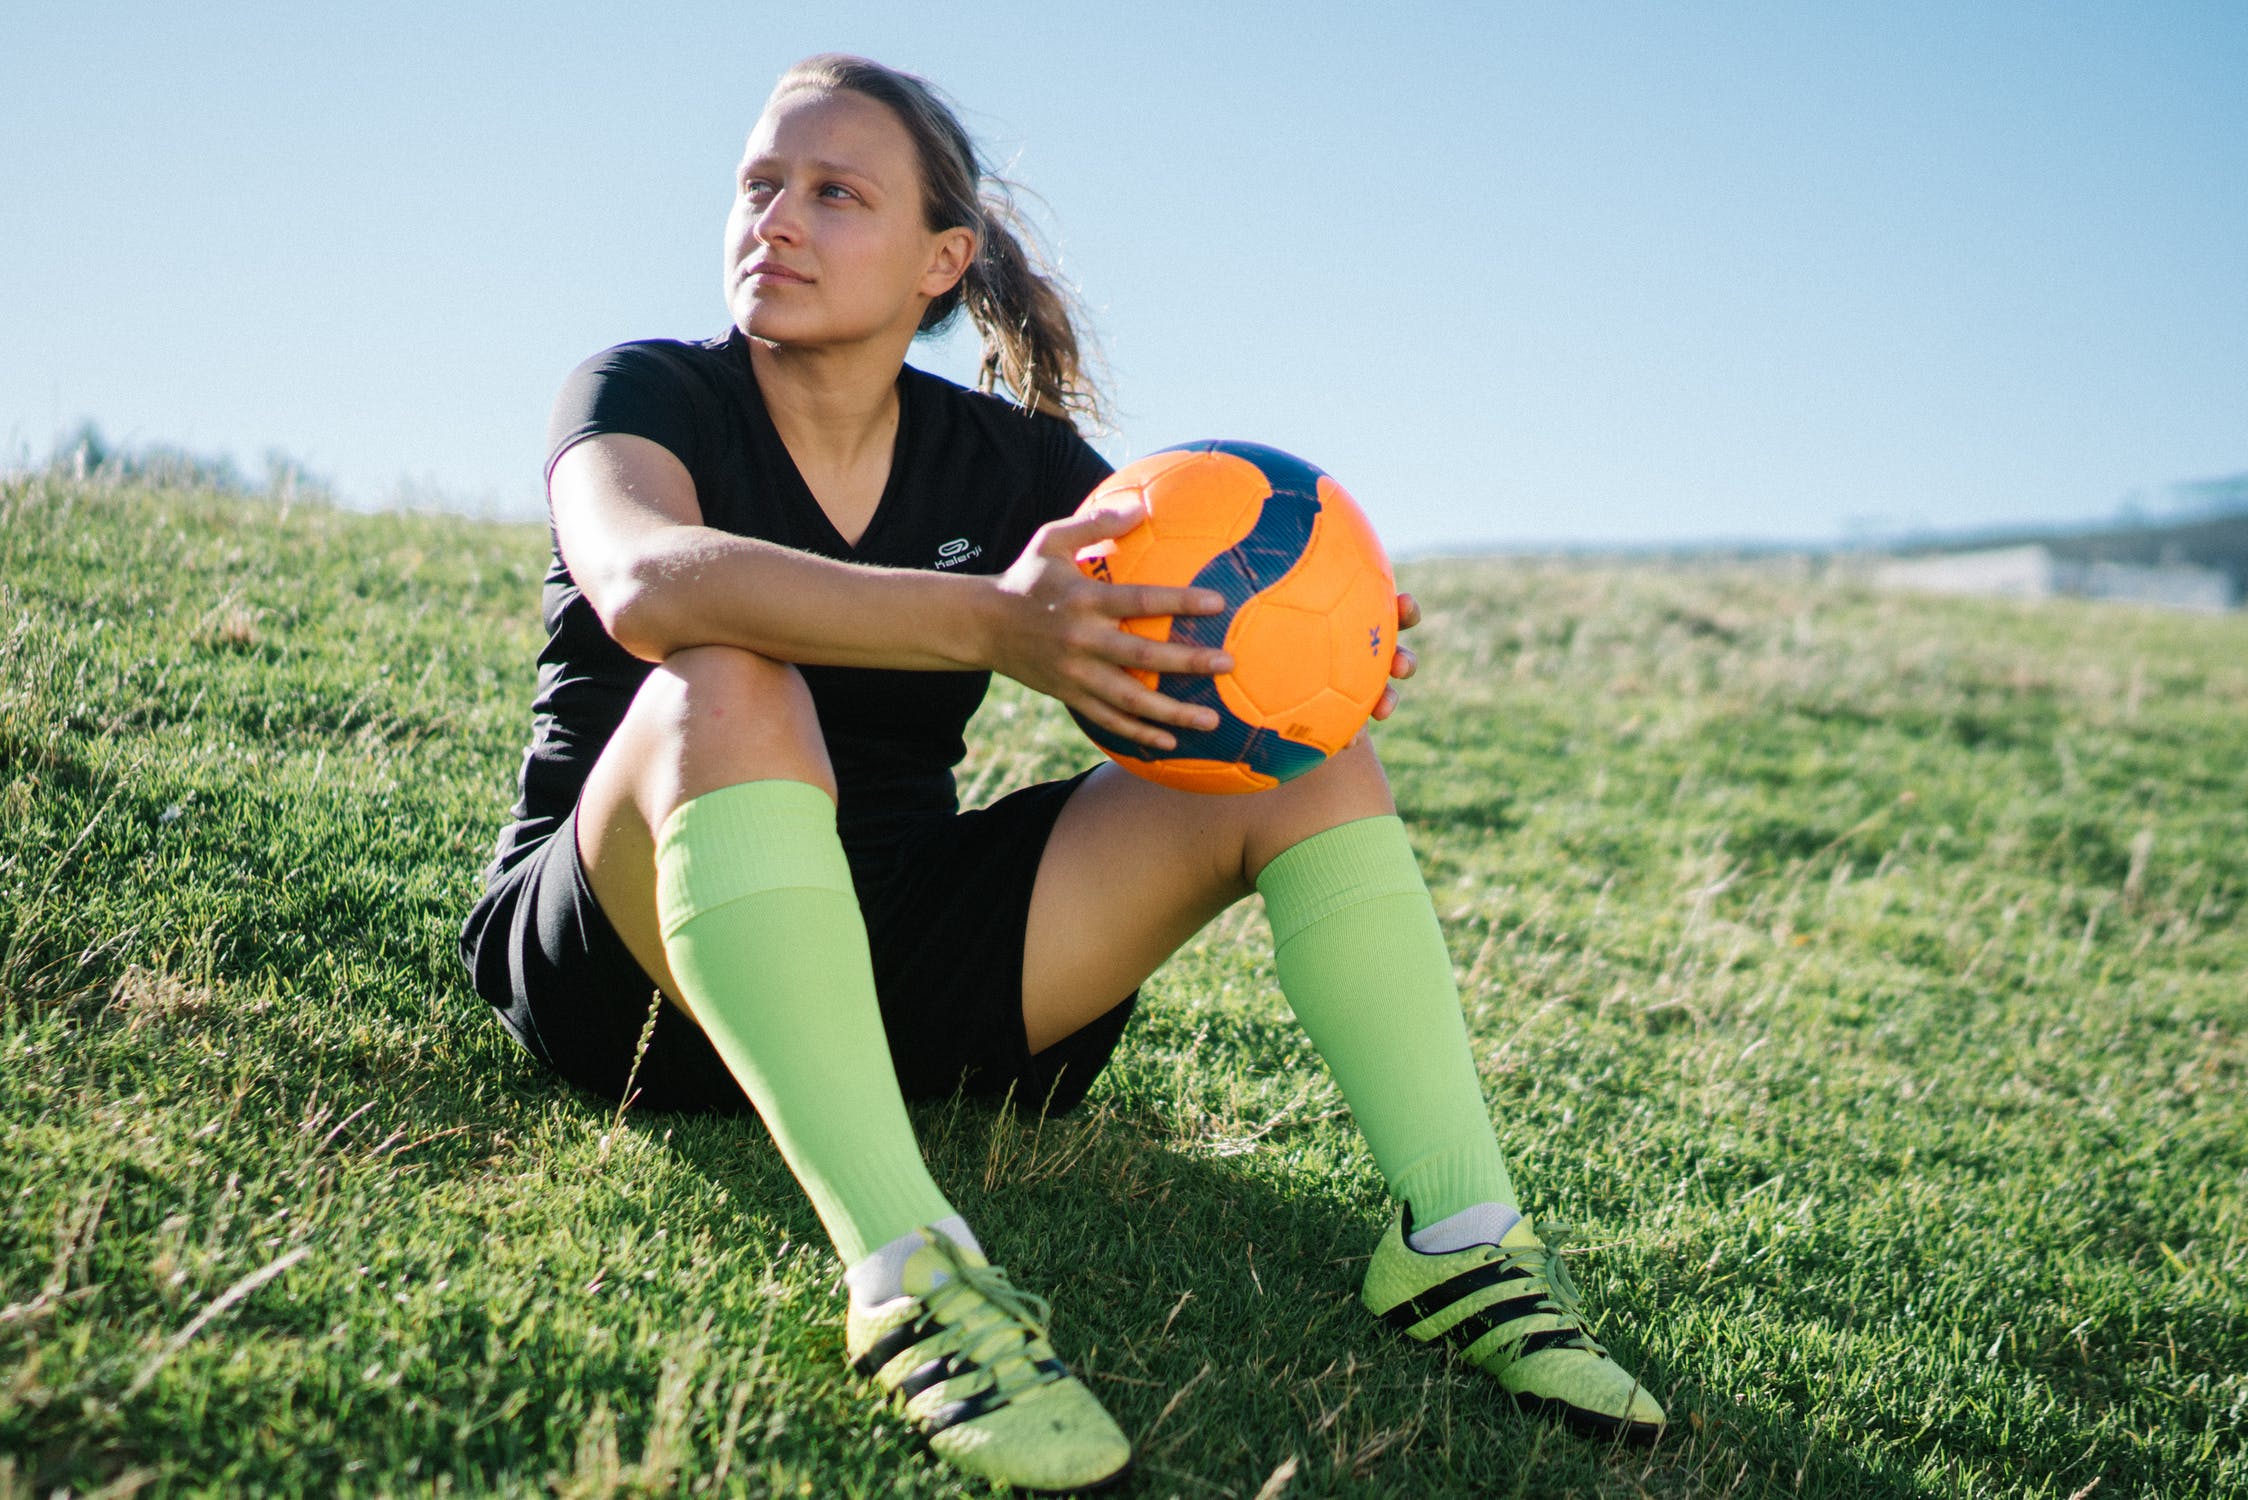 4 Best Careers for Amateur Soccer Players to Pursue